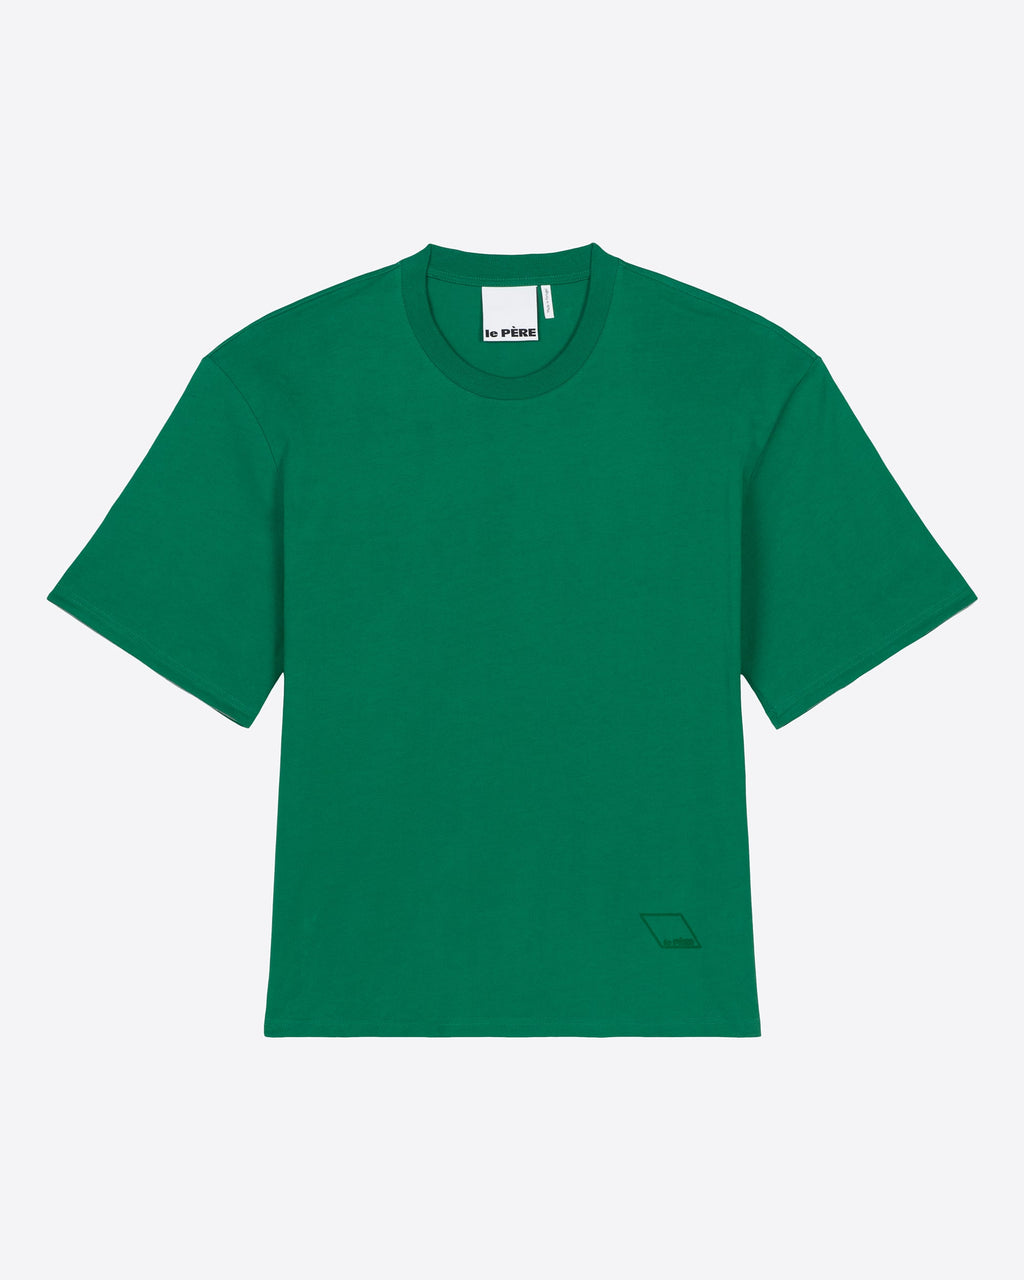 le PÈRE Emerald Green Double Sleeve Tee - Front